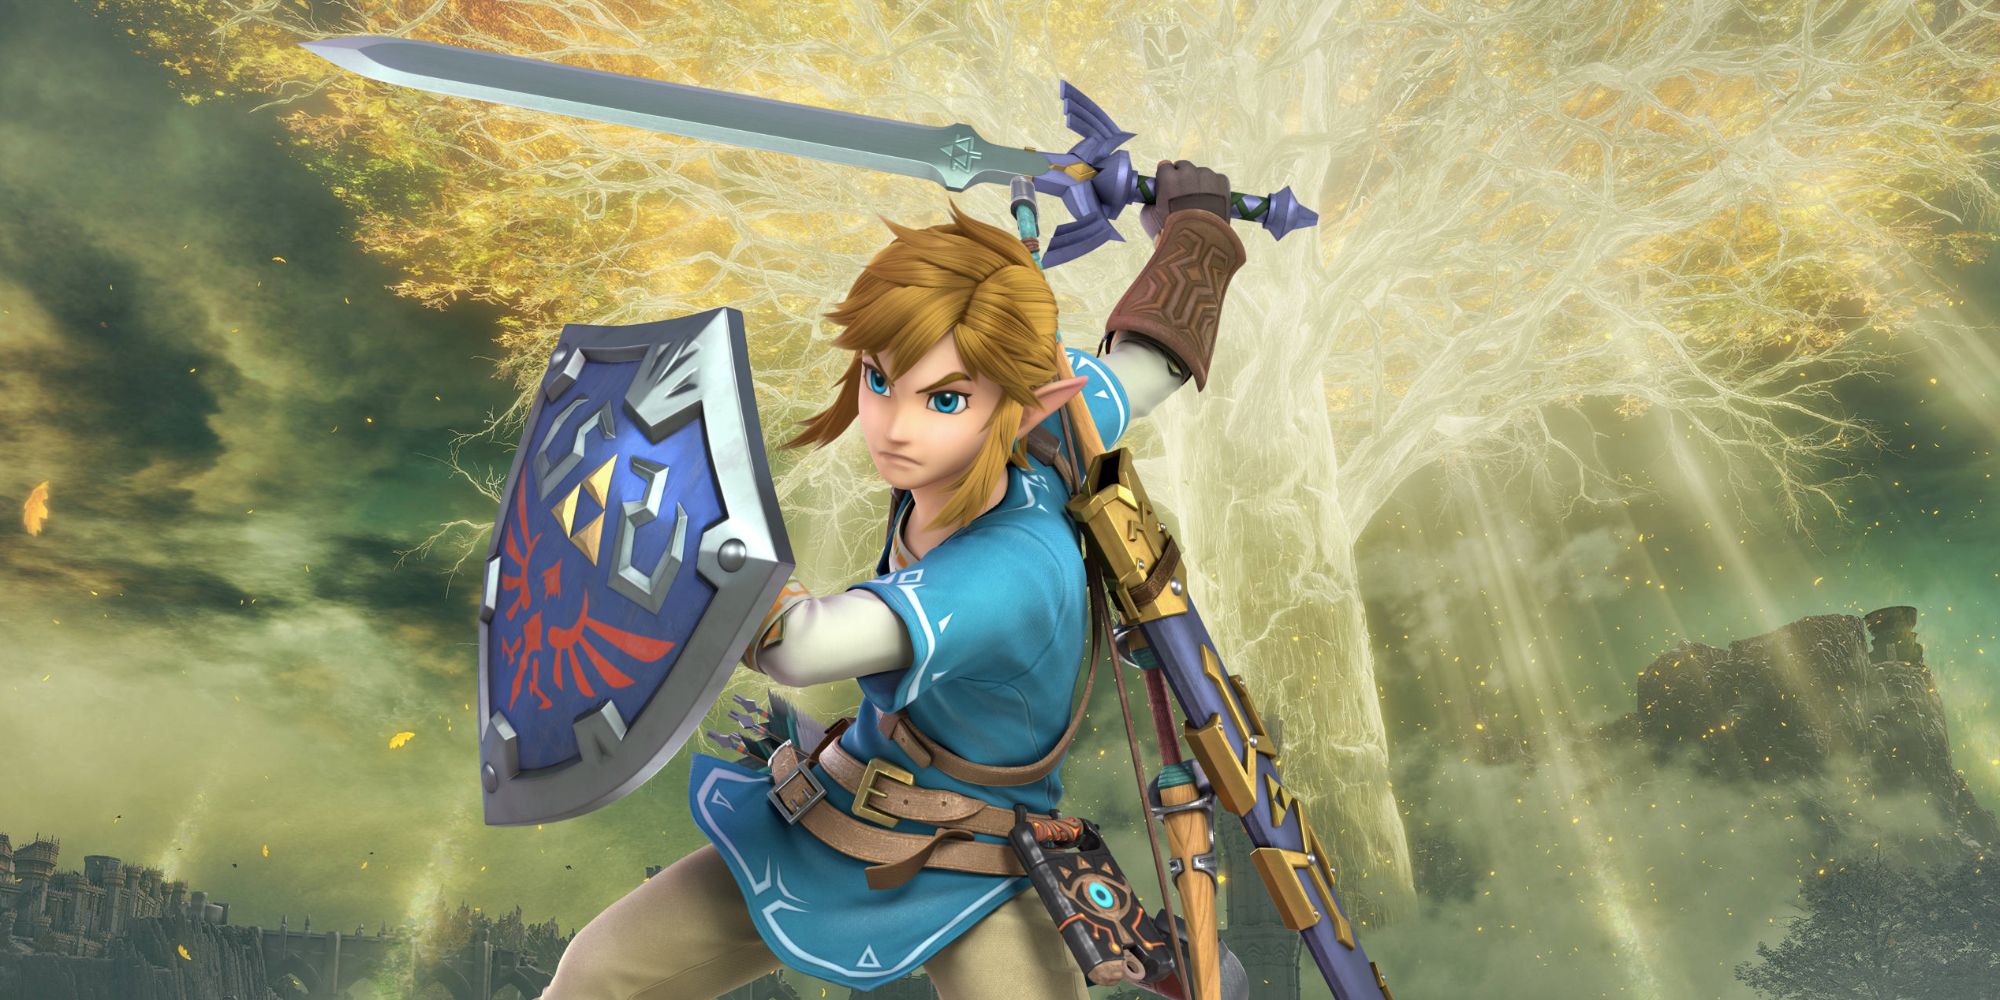 Link in his Breath of the Wild Champion's Tunic in front of the Erdtree from Elden Ring.